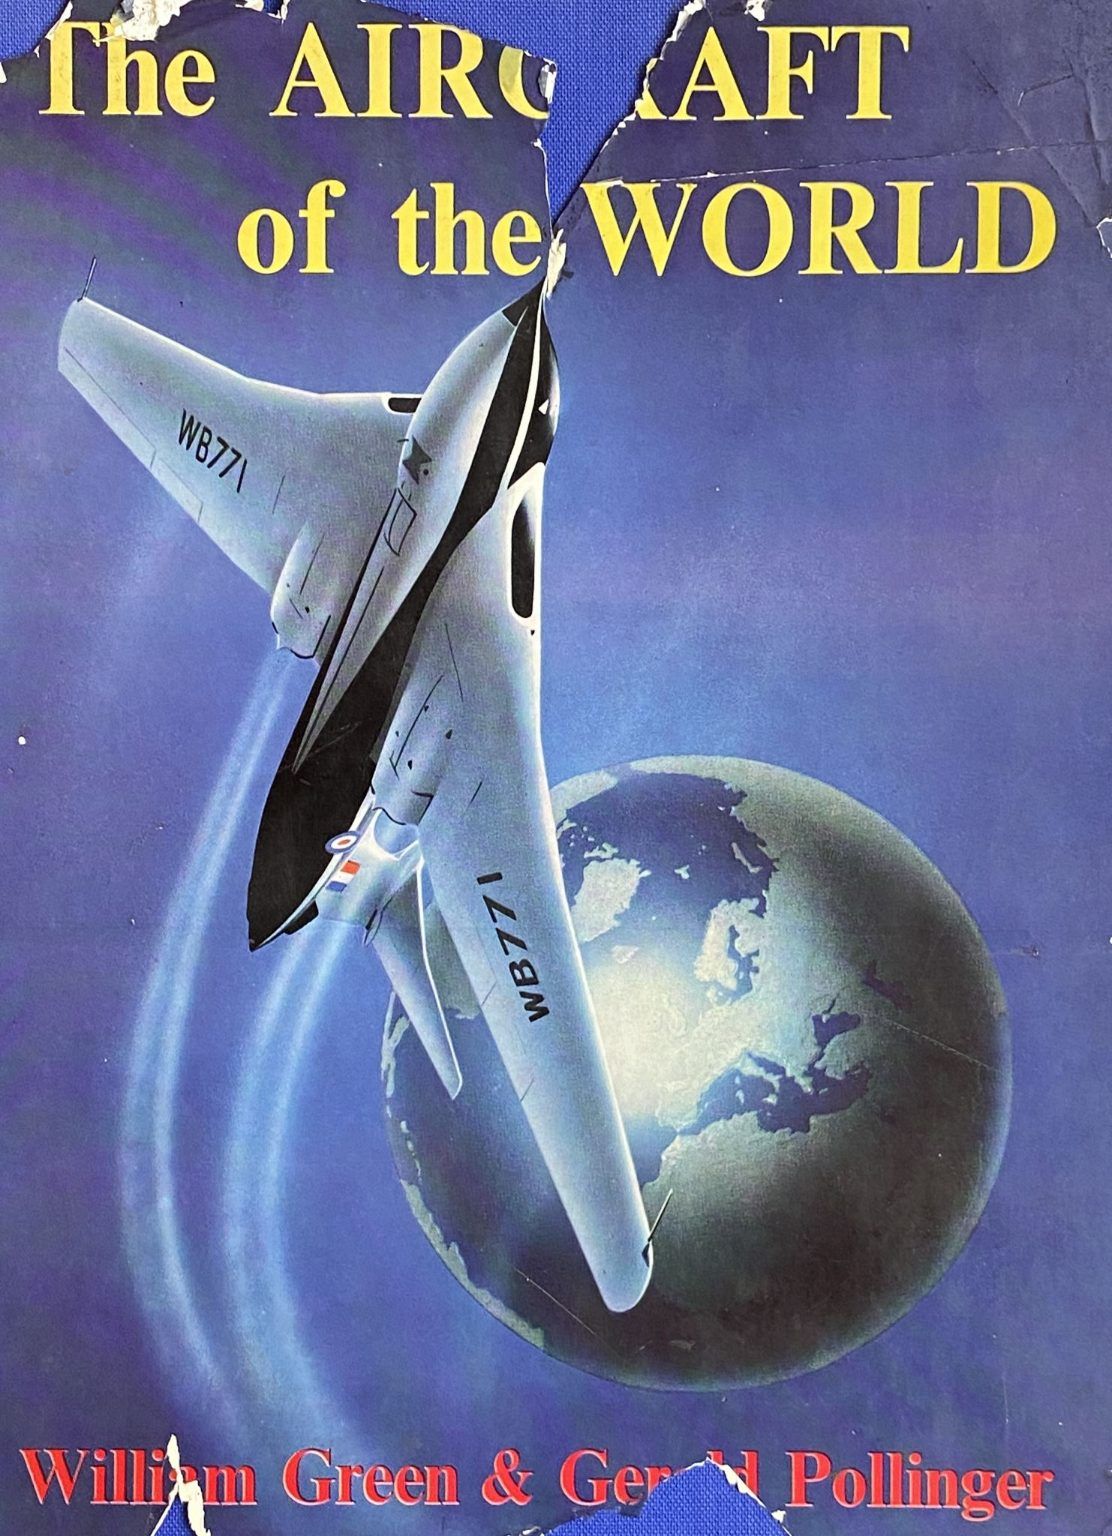 THE AIRCRAFT OF THE WORLD